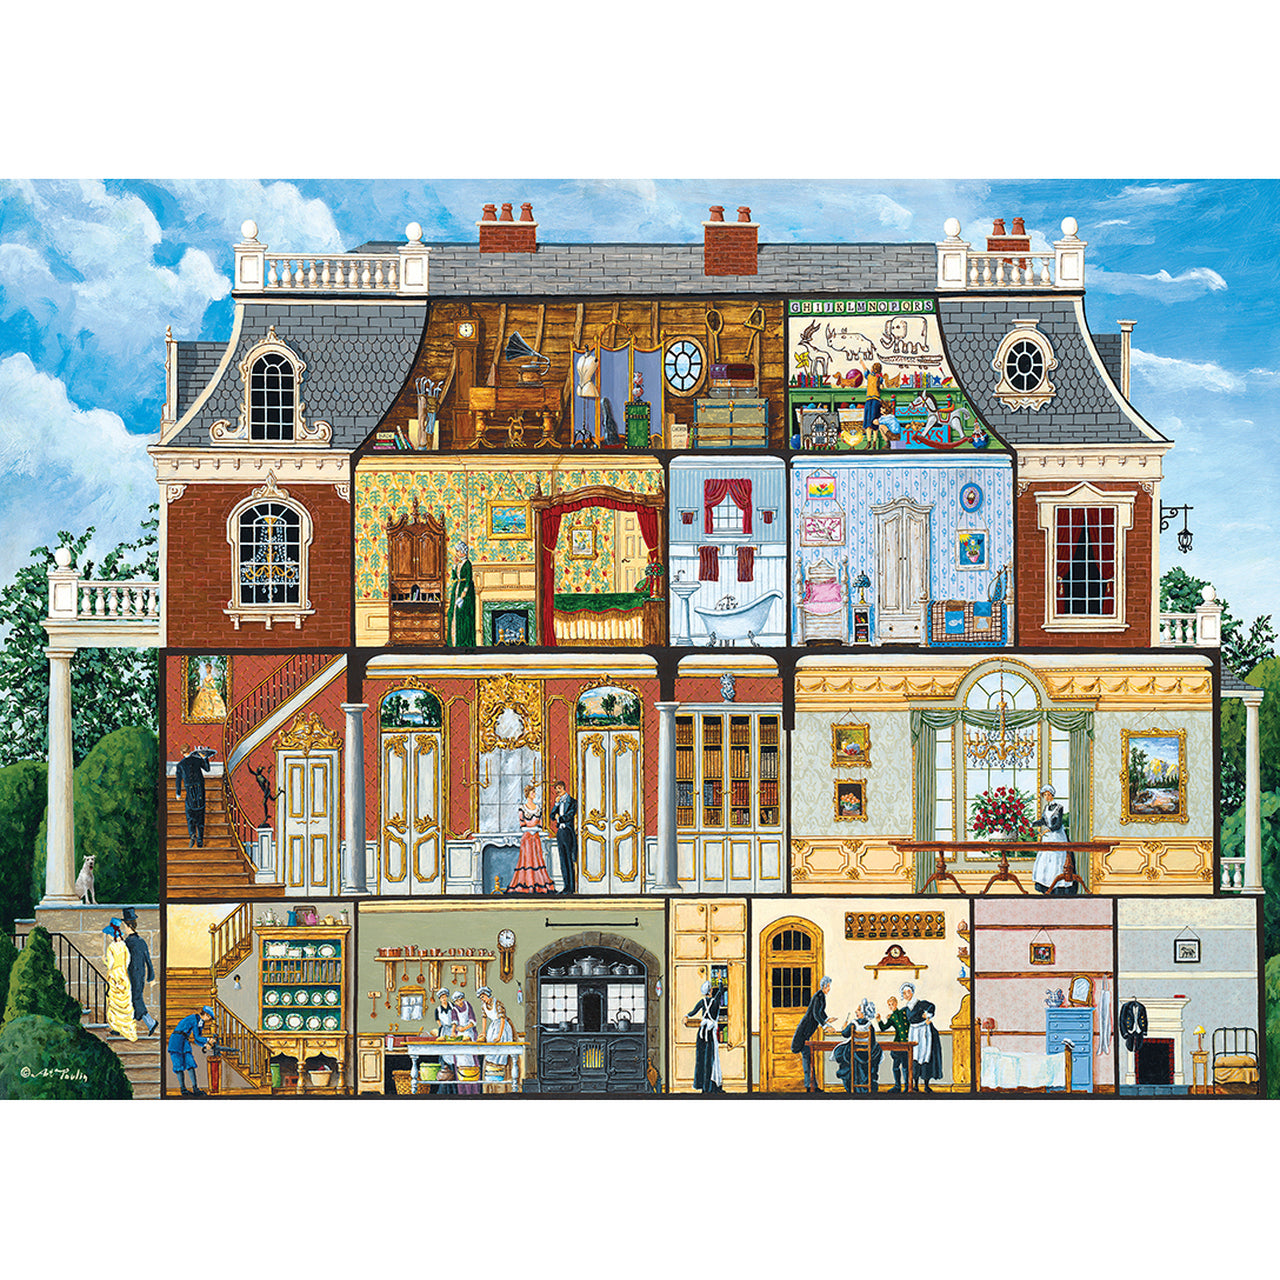 Inside Out Walden's Manor House- 1000 Piece Jigsaw Puzzle by Masterpieces